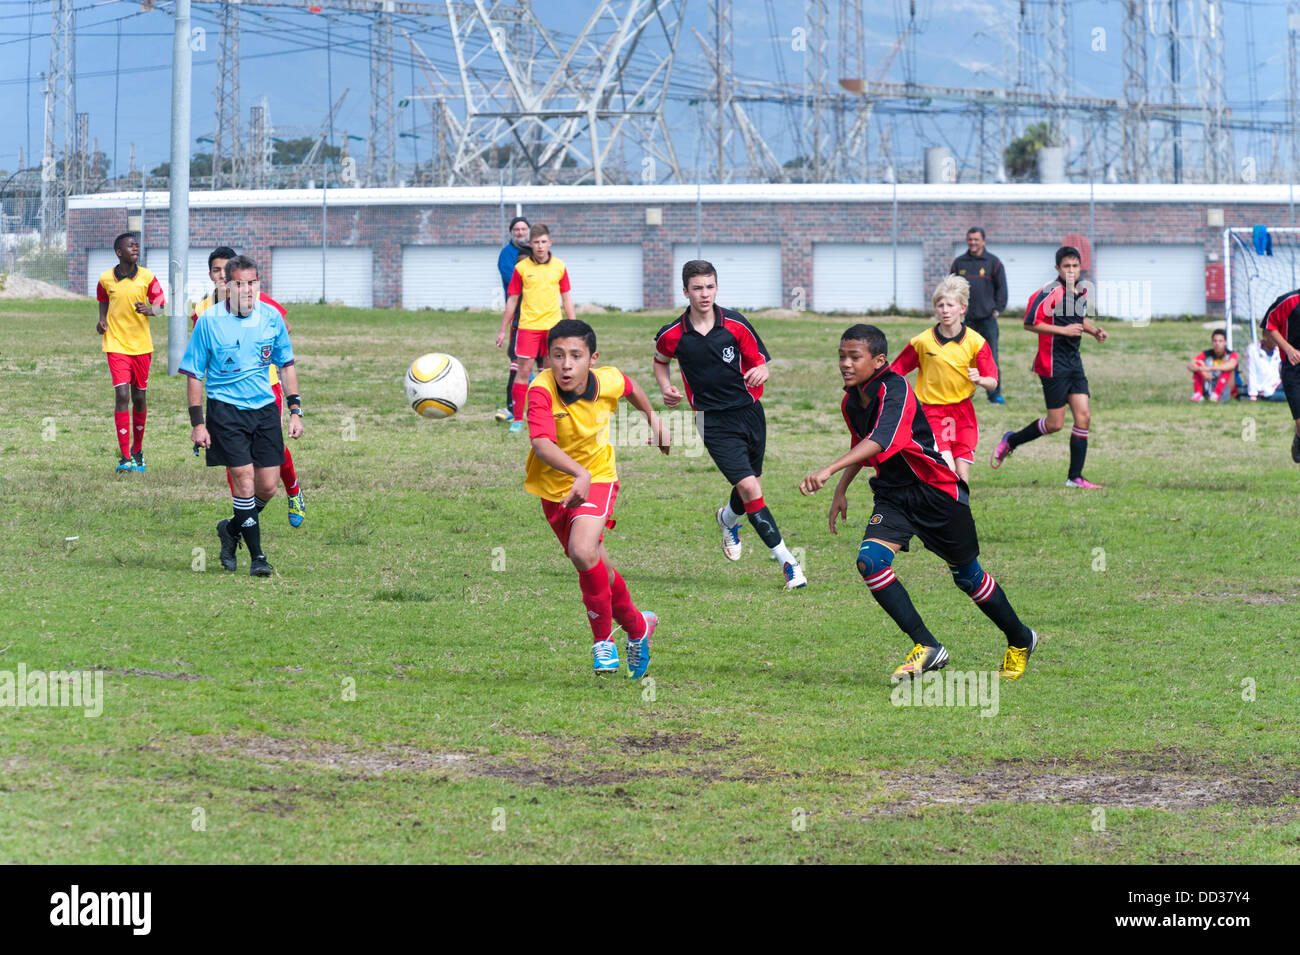 U15B football players in action playing a match Cape Town, South Africa Stock Photo